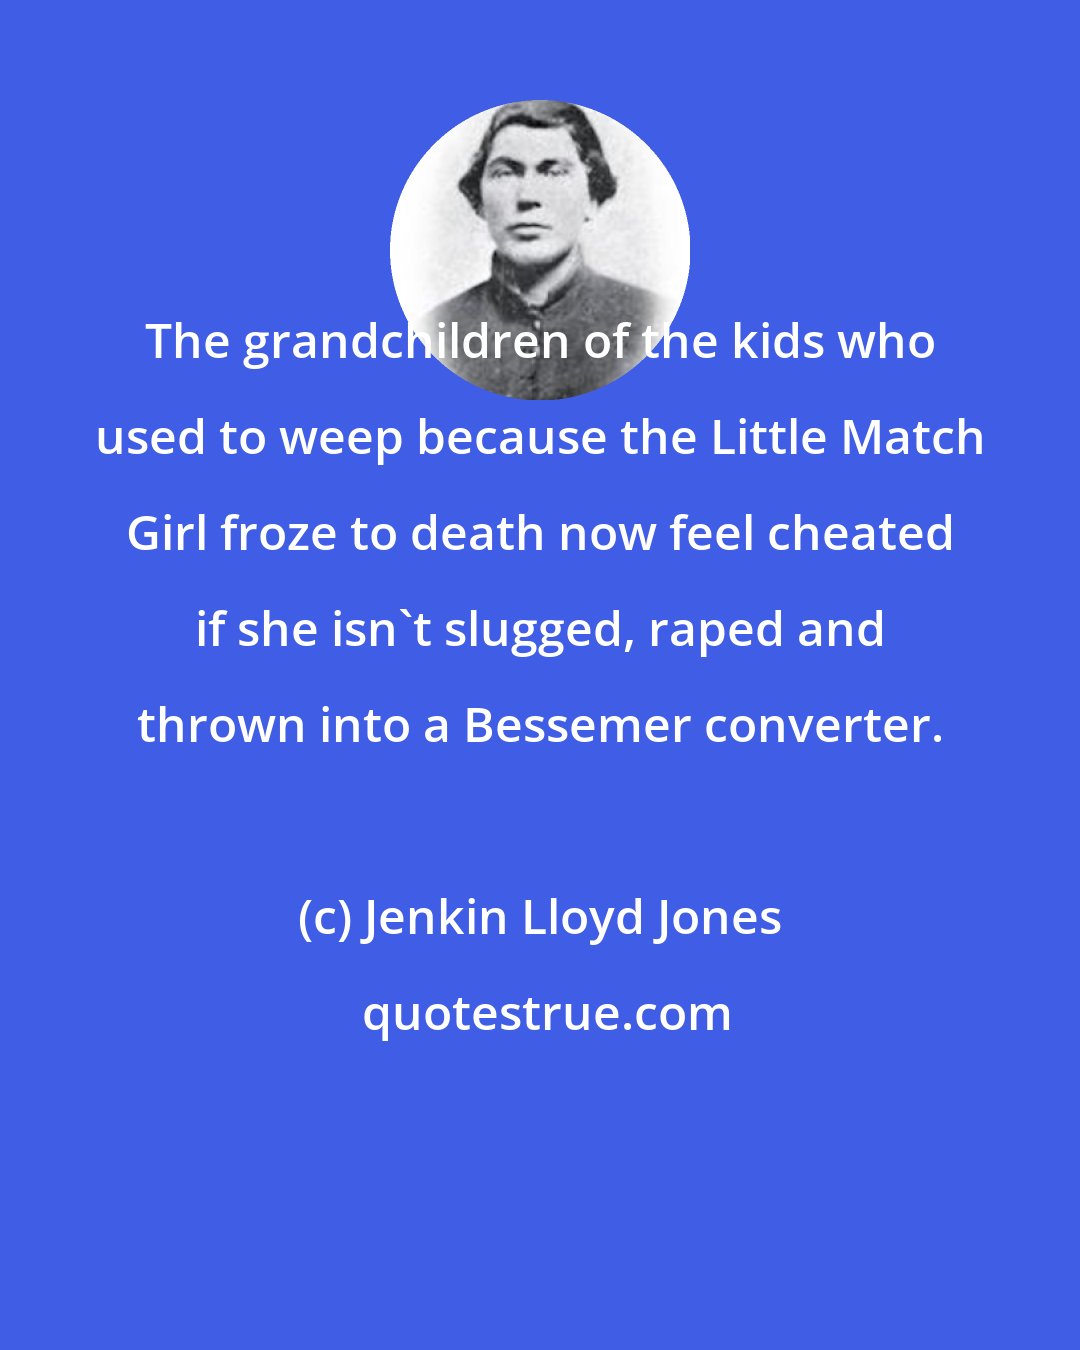 Jenkin Lloyd Jones: The grandchildren of the kids who used to weep because the Little Match Girl froze to death now feel cheated if she isn't slugged, raped and thrown into a Bessemer converter.